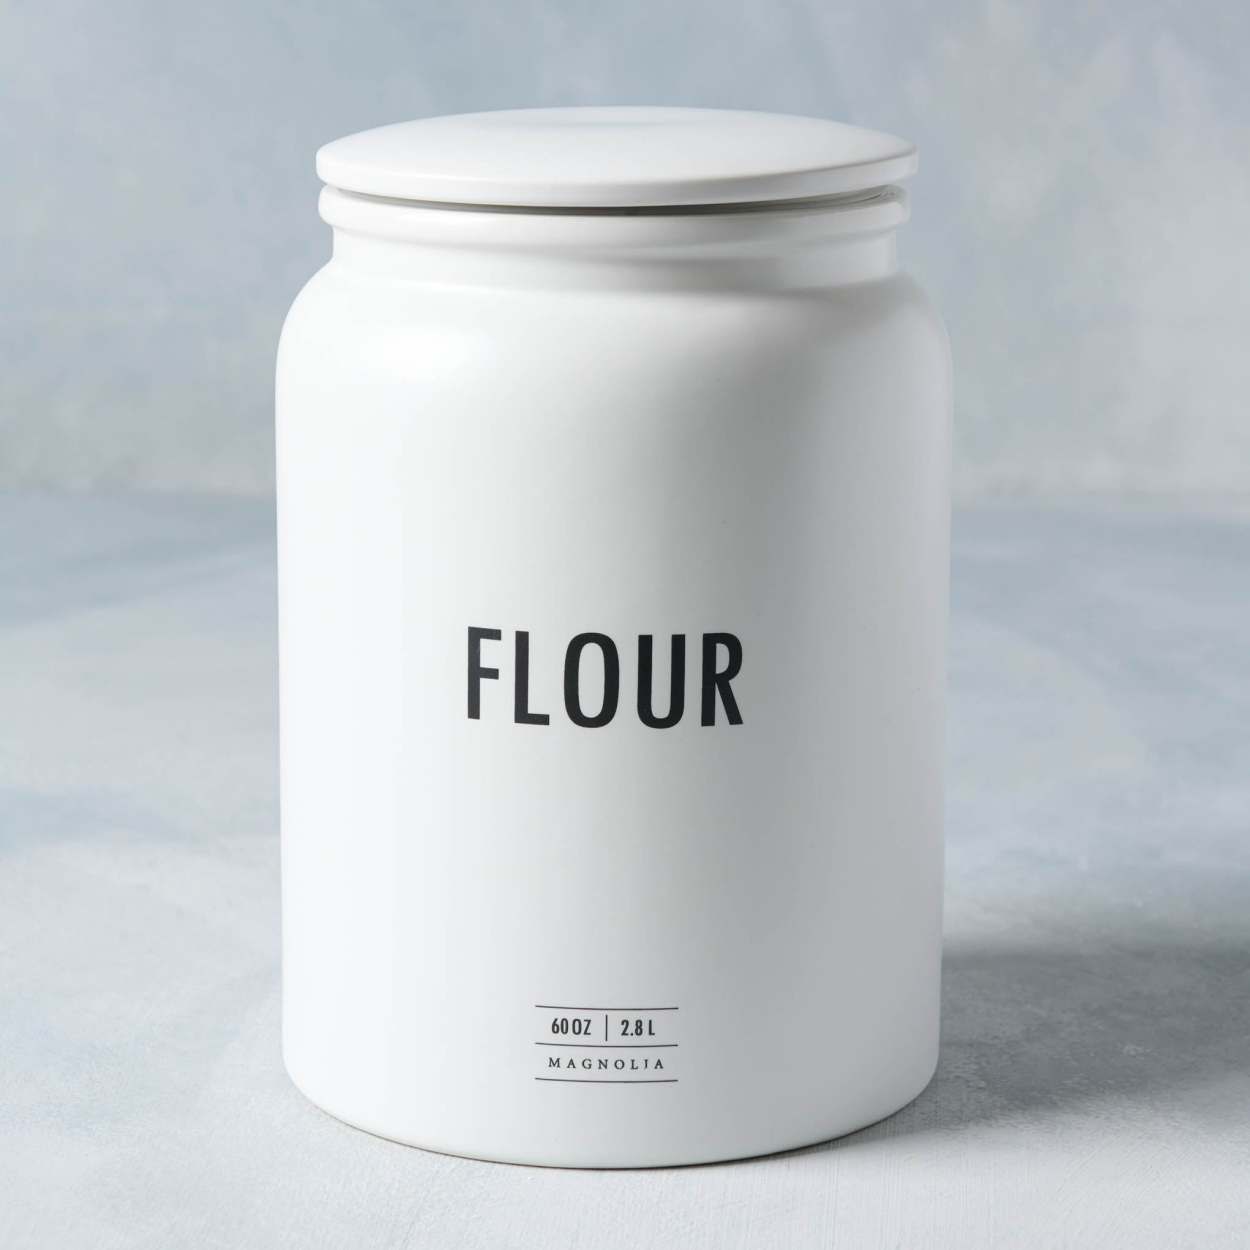  Flour Container - Cute Ceramic Flour Canister for the